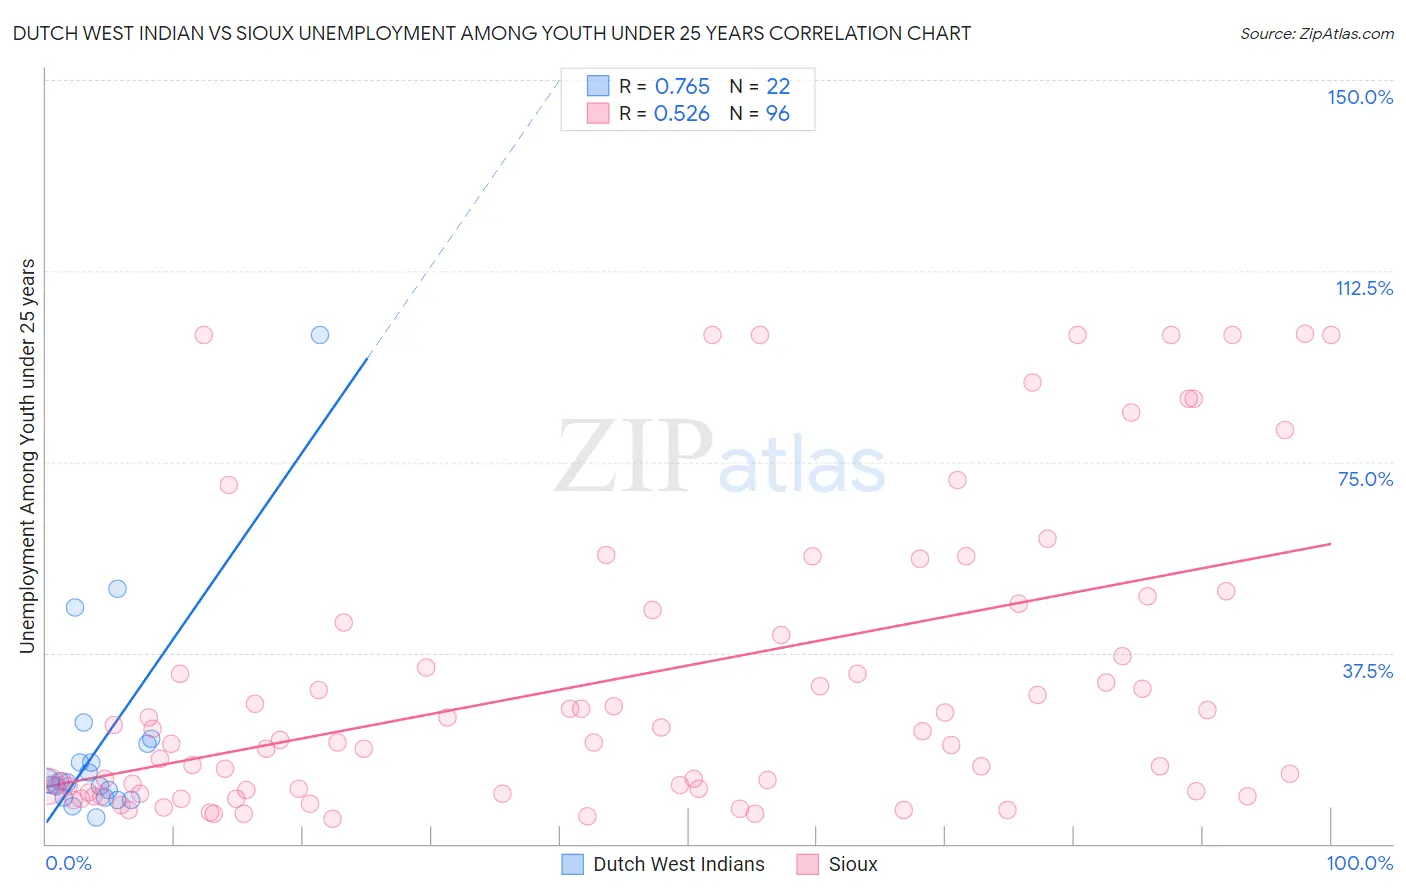 Dutch West Indian vs Sioux Unemployment Among Youth under 25 years